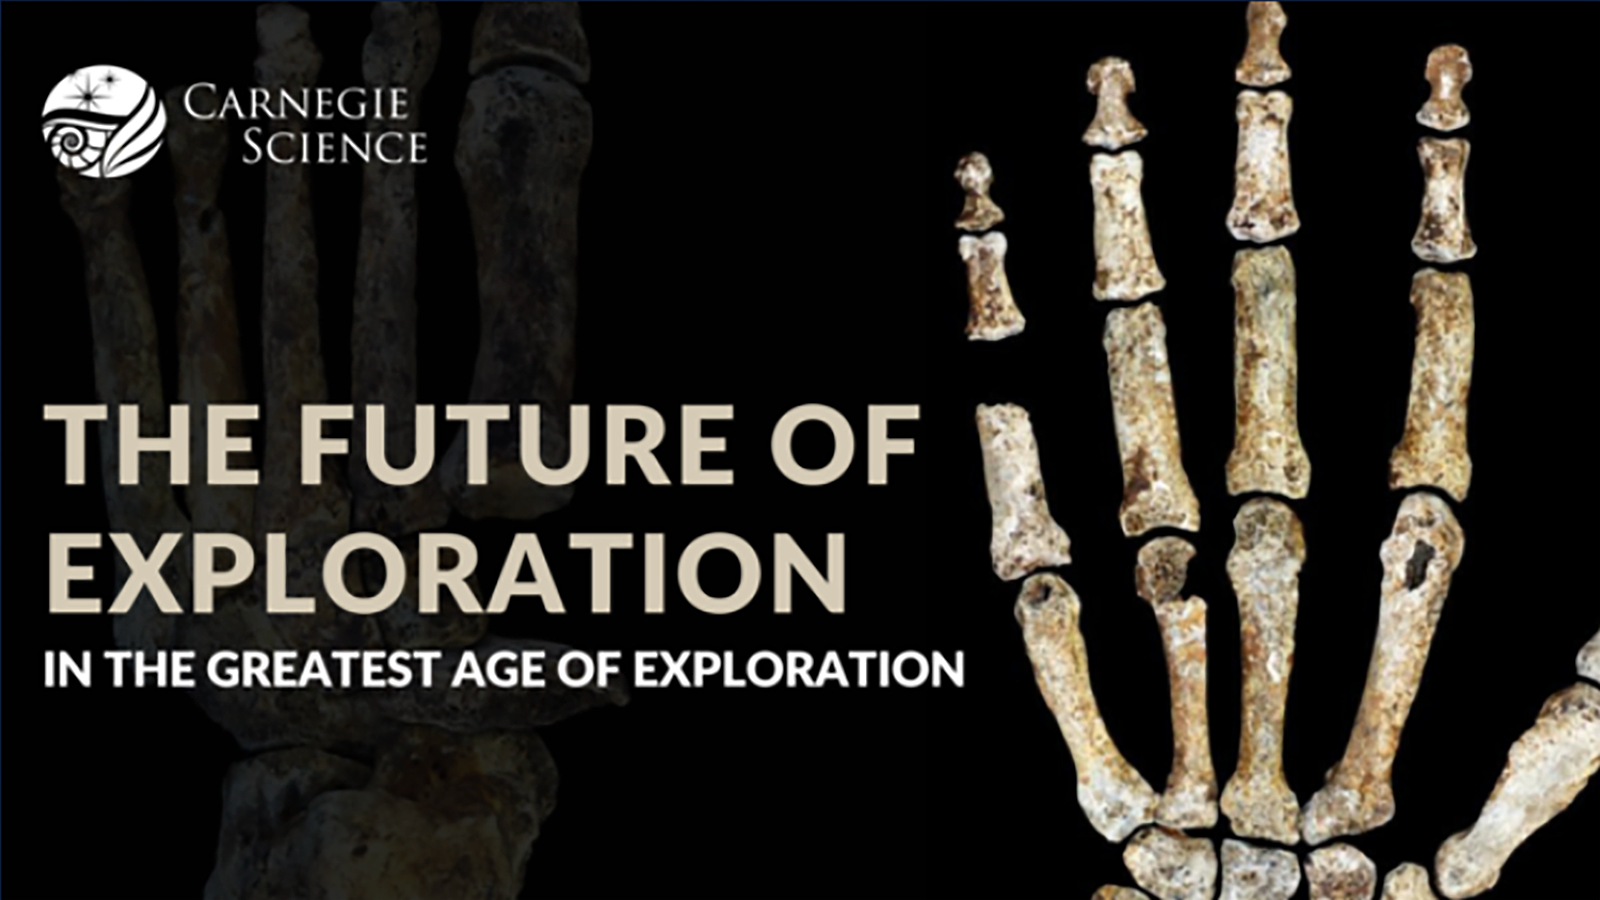 Professor Lee Berger The Future of Exploration in the Greatest Age of Exploration Homo naledi Carnegie Public Lecture